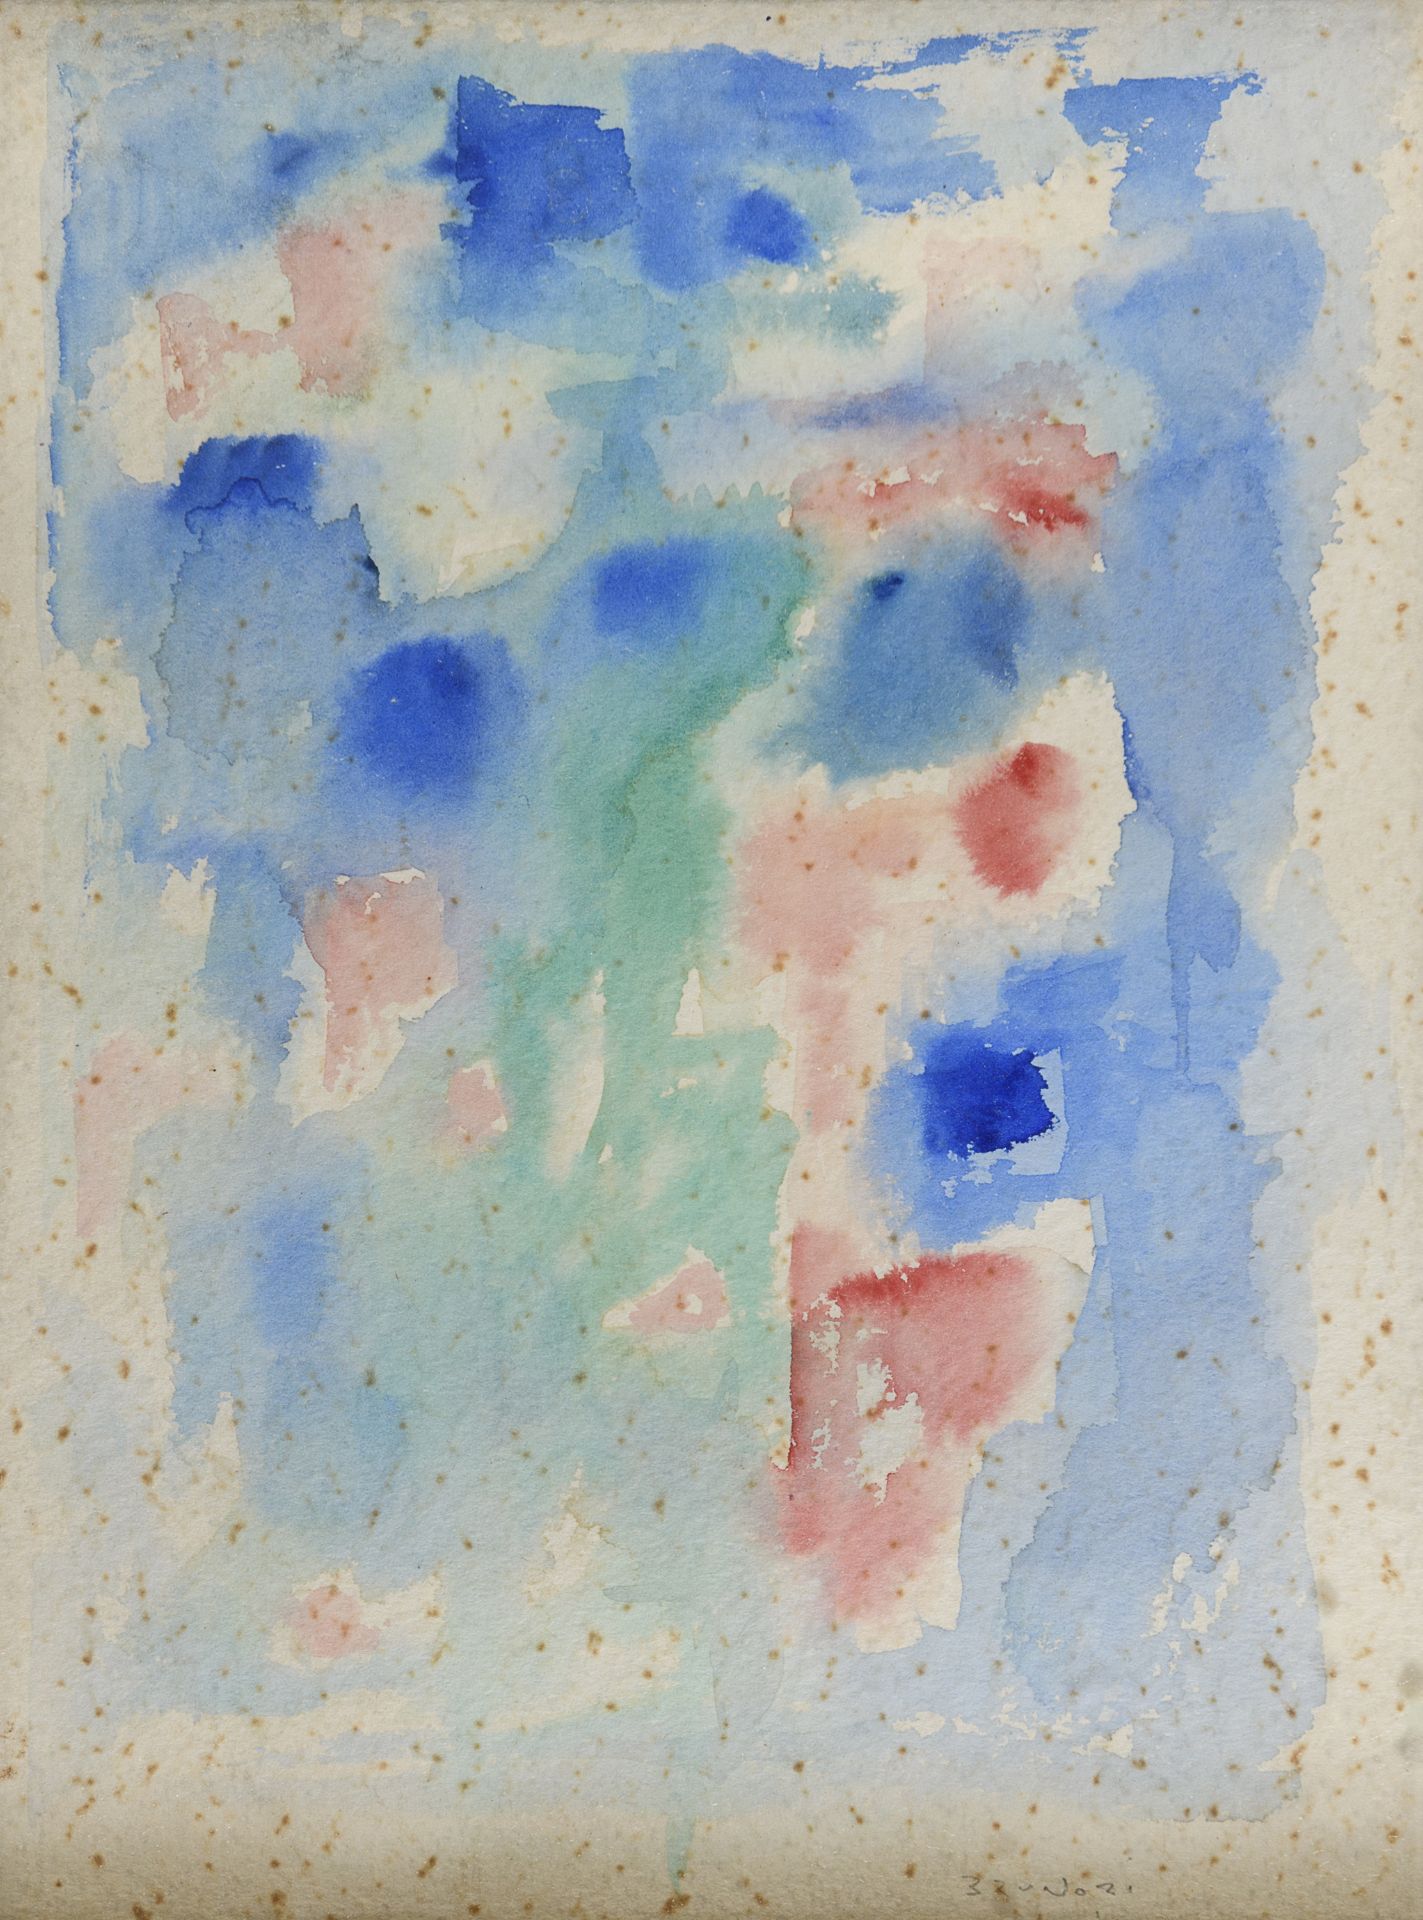 ABSTRACT WATERCOLOR BY ENZO BRUNORI 1959